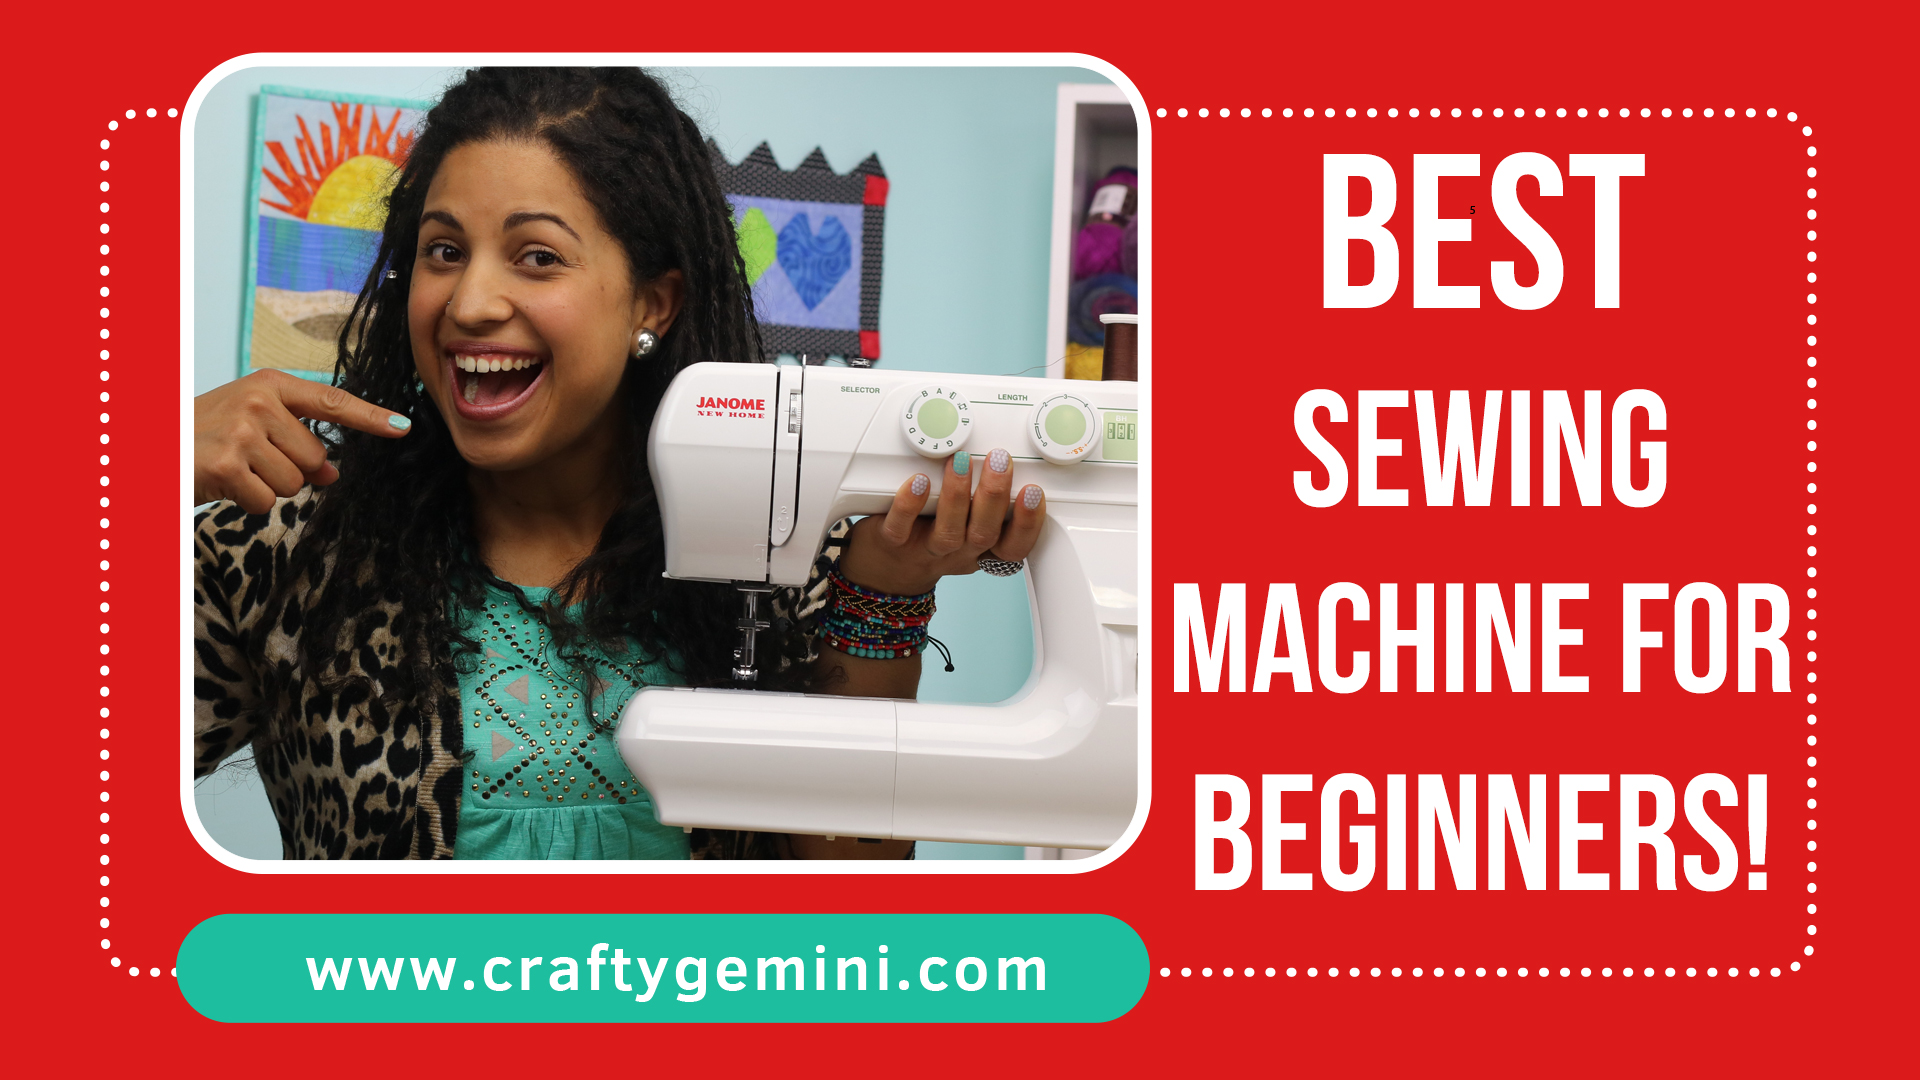 best sewing machine for beginners viideo review of janome 2212 by the crafty gemini